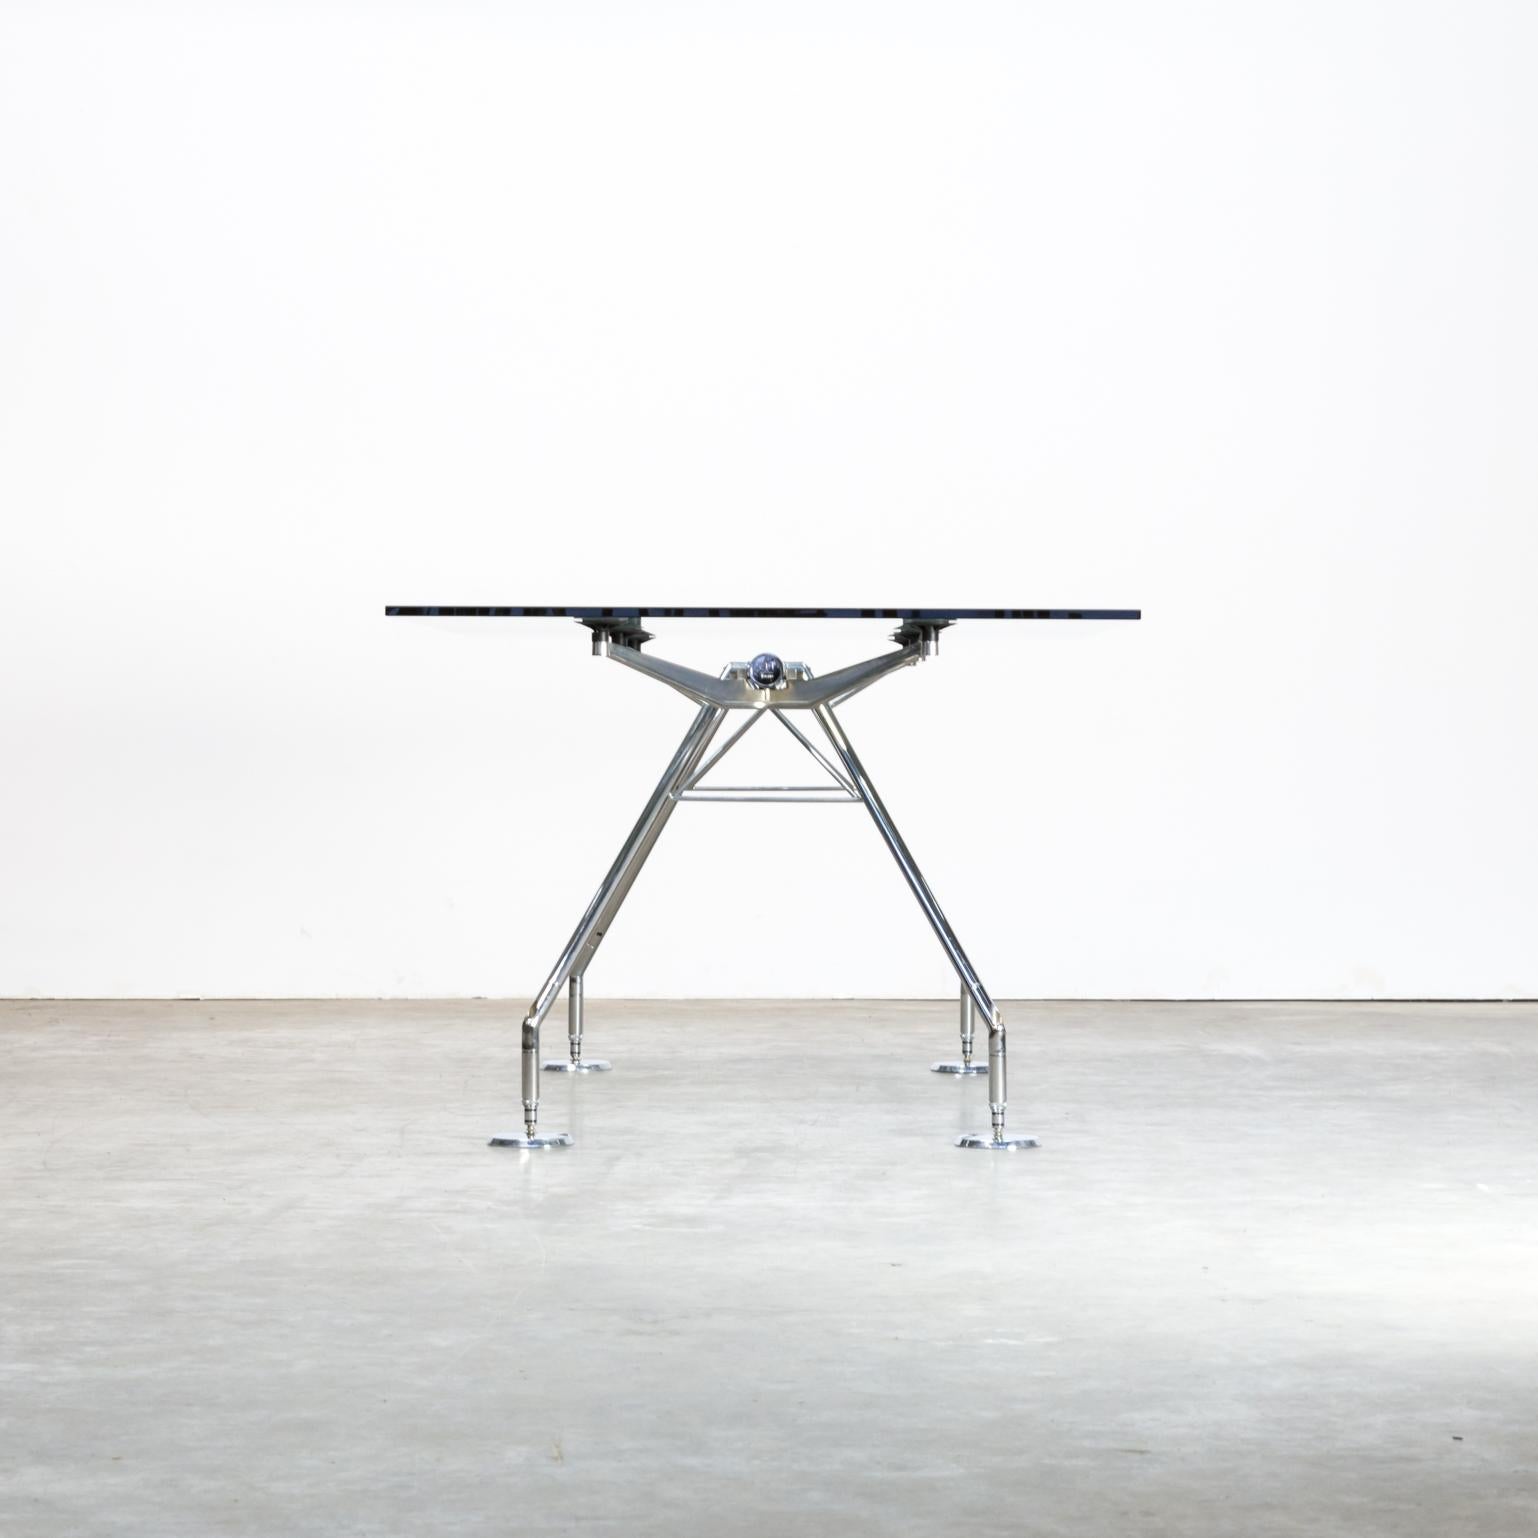 1980s Norman Foster ‘nomos’ dining table for Tecno. Good condition, wear consistent with age and use. Beautiful frame.